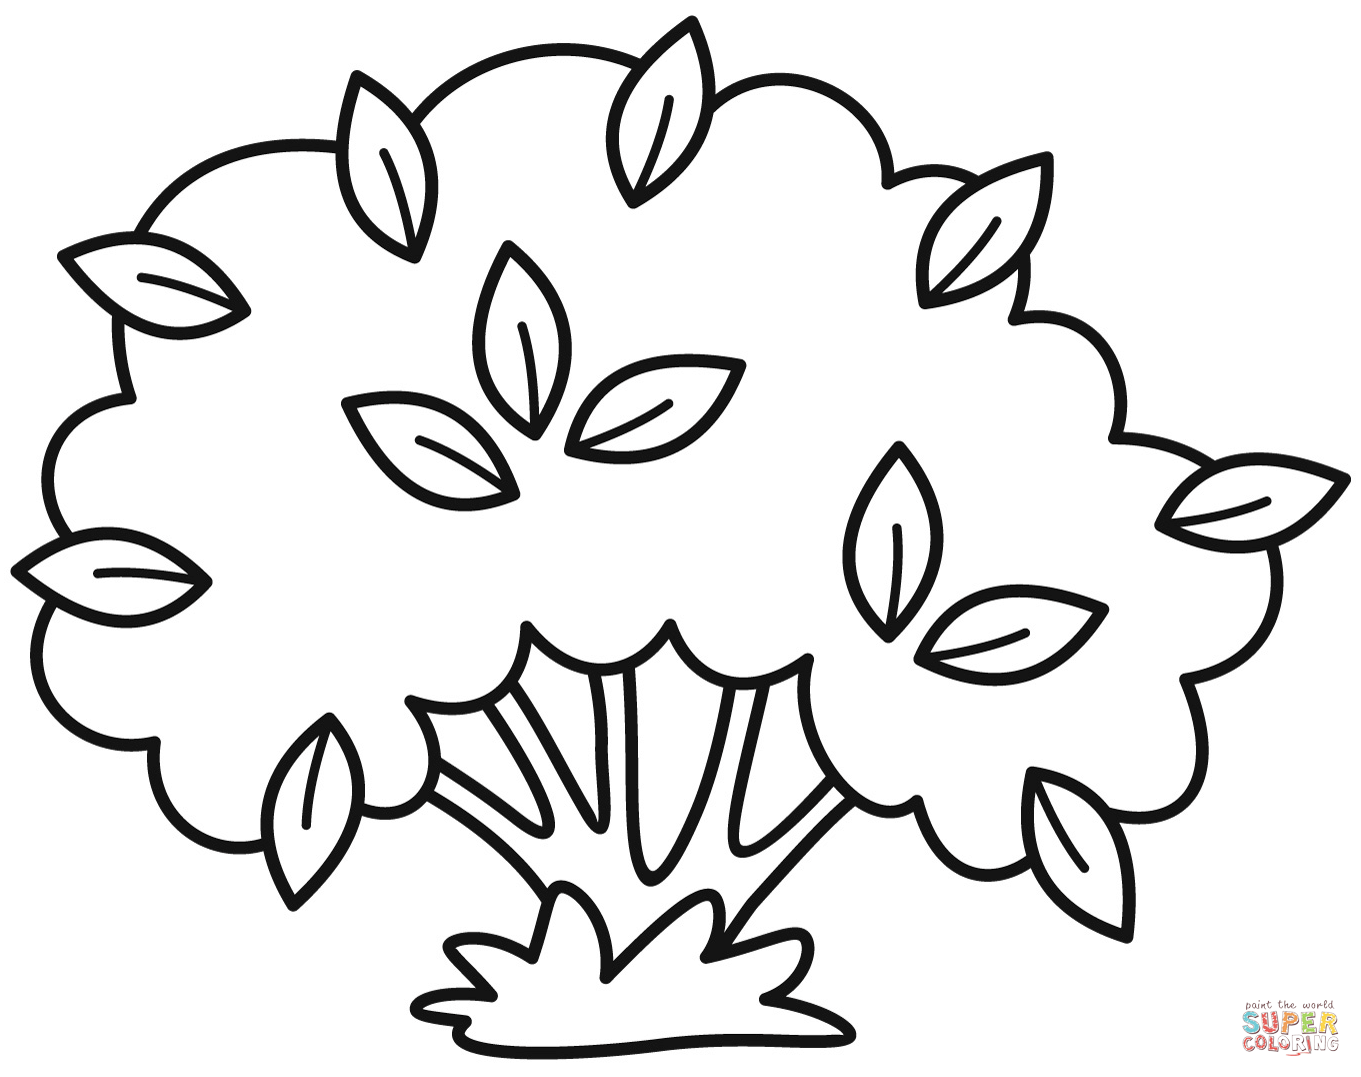 Bush coloring page free printable coloring pages